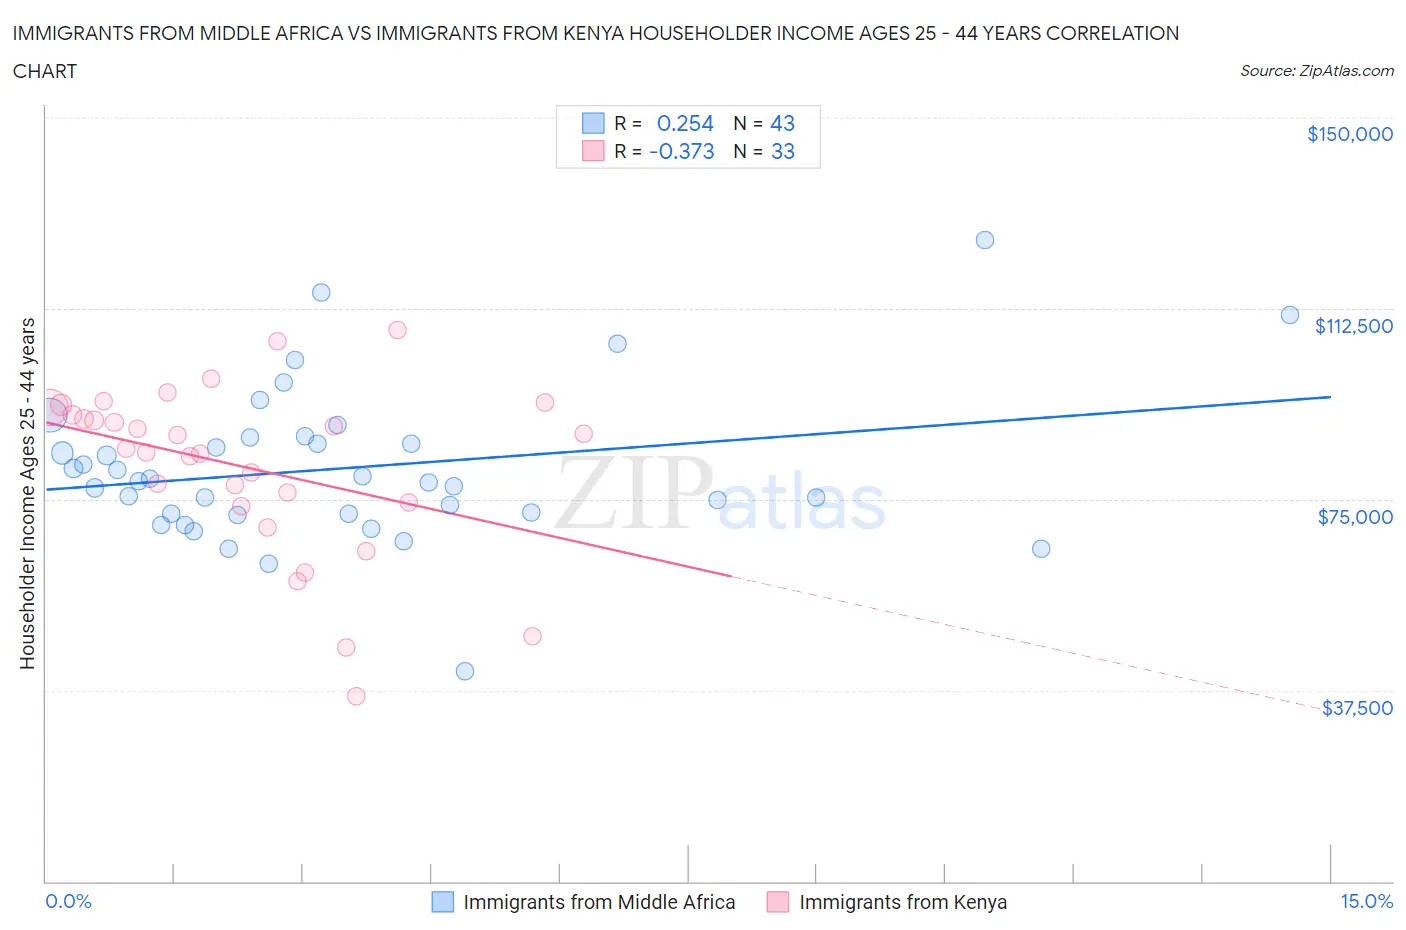 Immigrants from Middle Africa vs Immigrants from Kenya Householder Income Ages 25 - 44 years